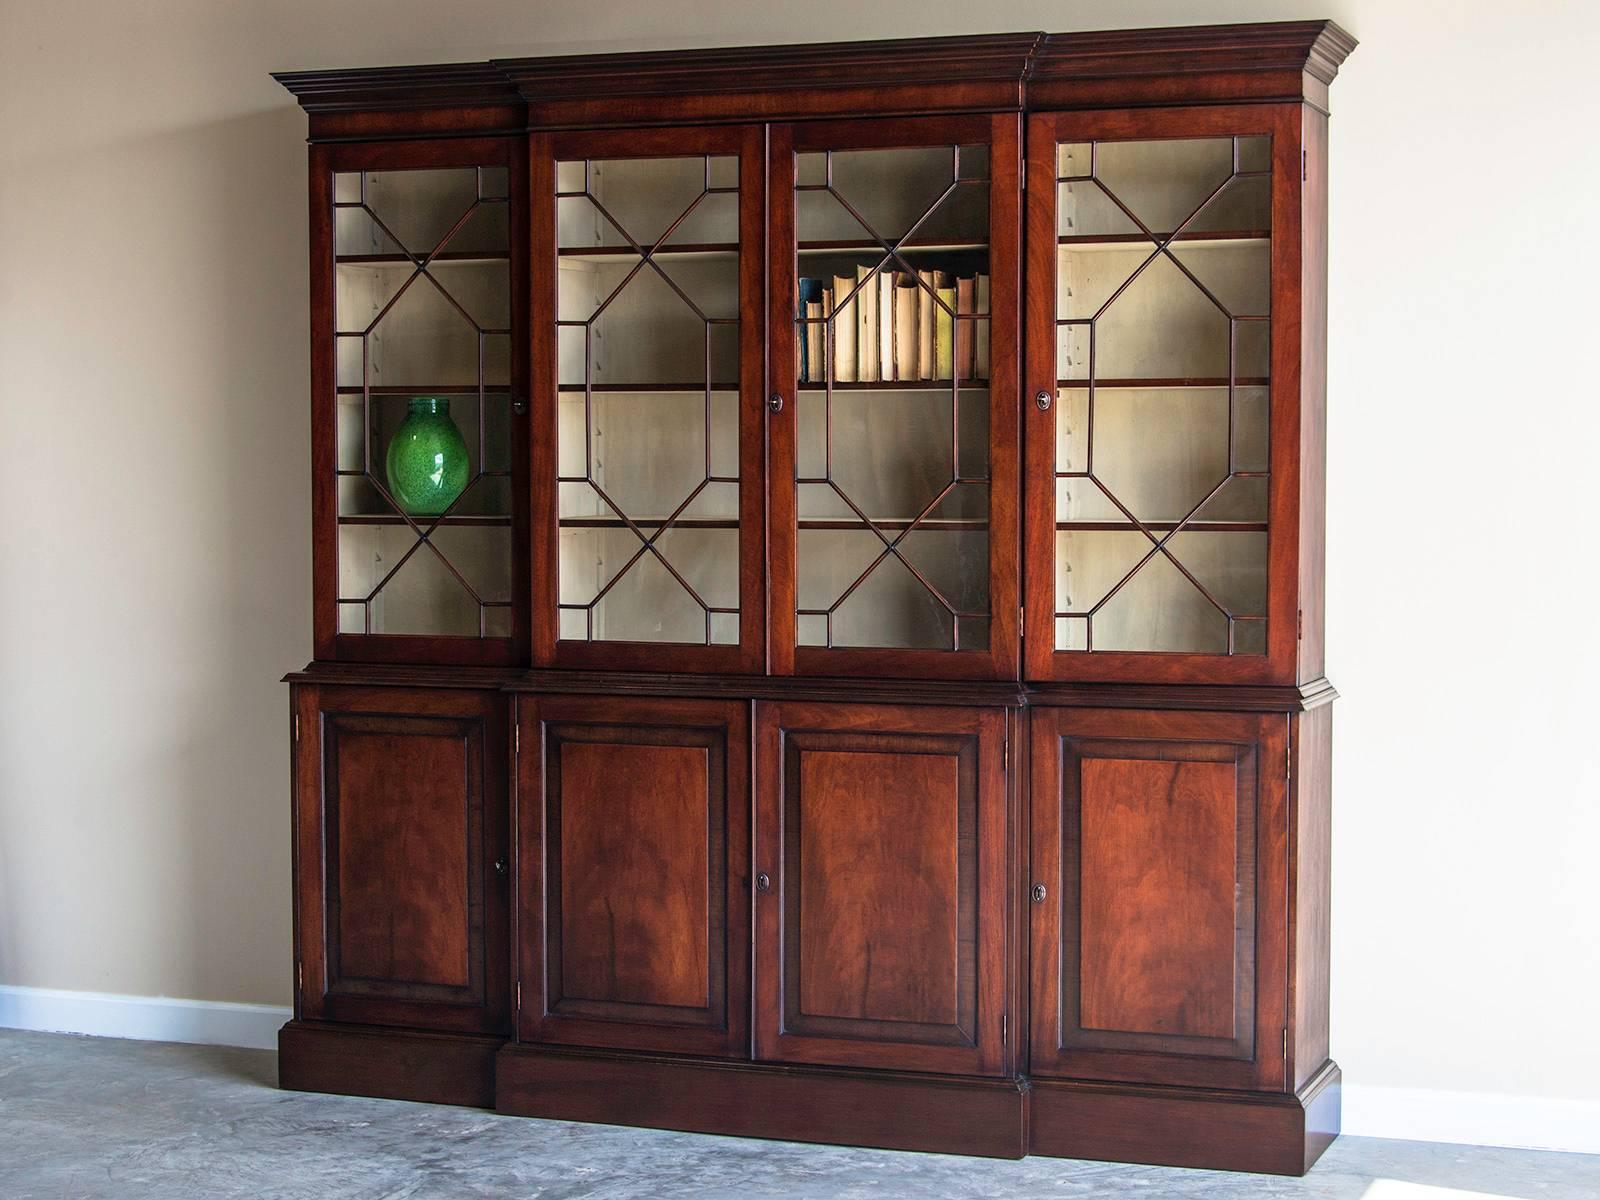 Receive our new selections direct from 1stdibs by email each week. Please click Follow Dealer below and see them first!

George III style mahogany breakfront crossbanded with rosewood from England. This elegant bookcase/display cabinet has been